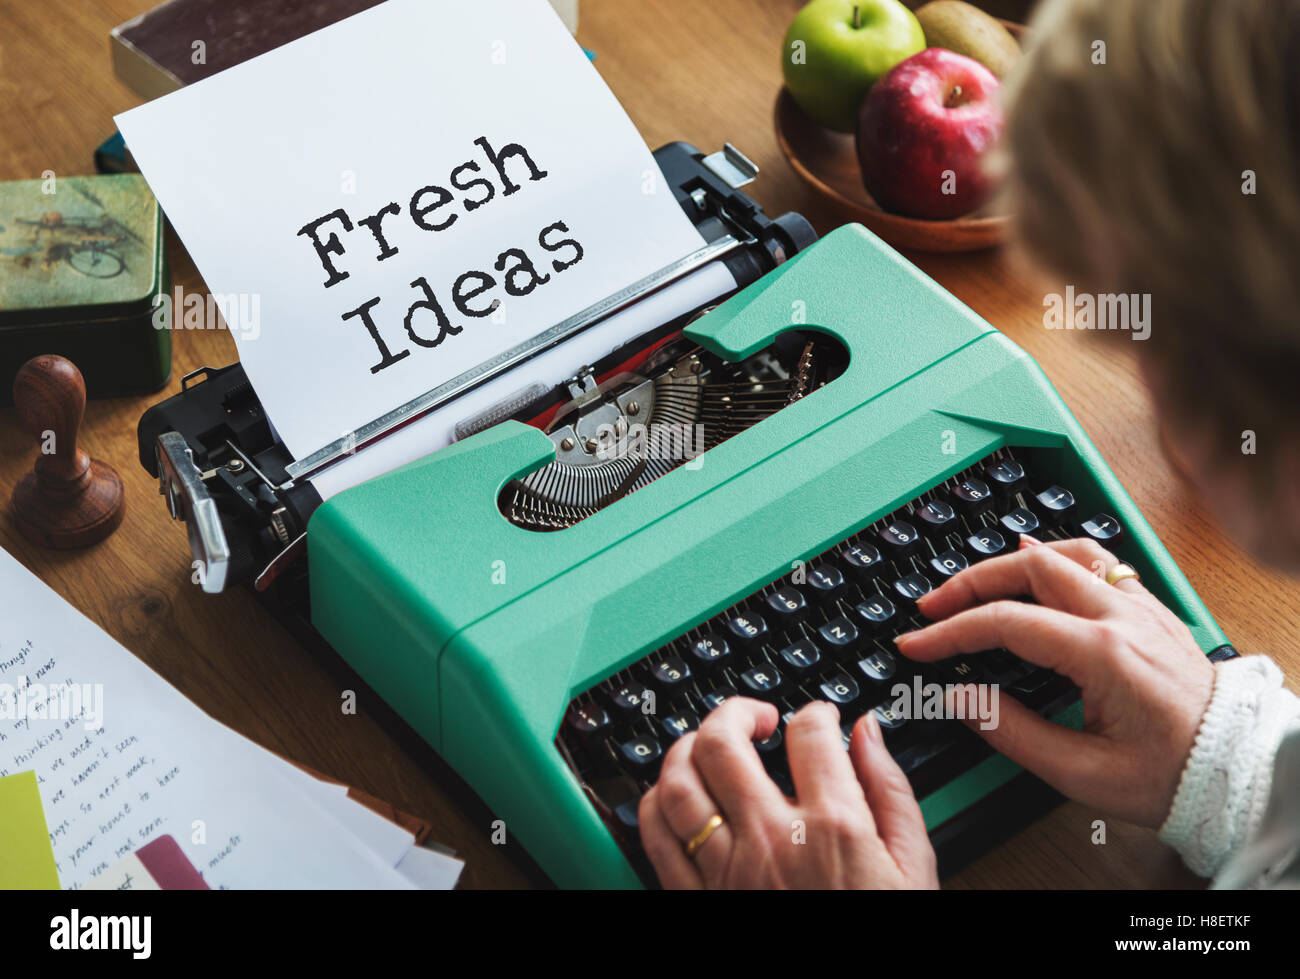 Fresh Ideas Innovation Proposition Vision Concept Stock Photo